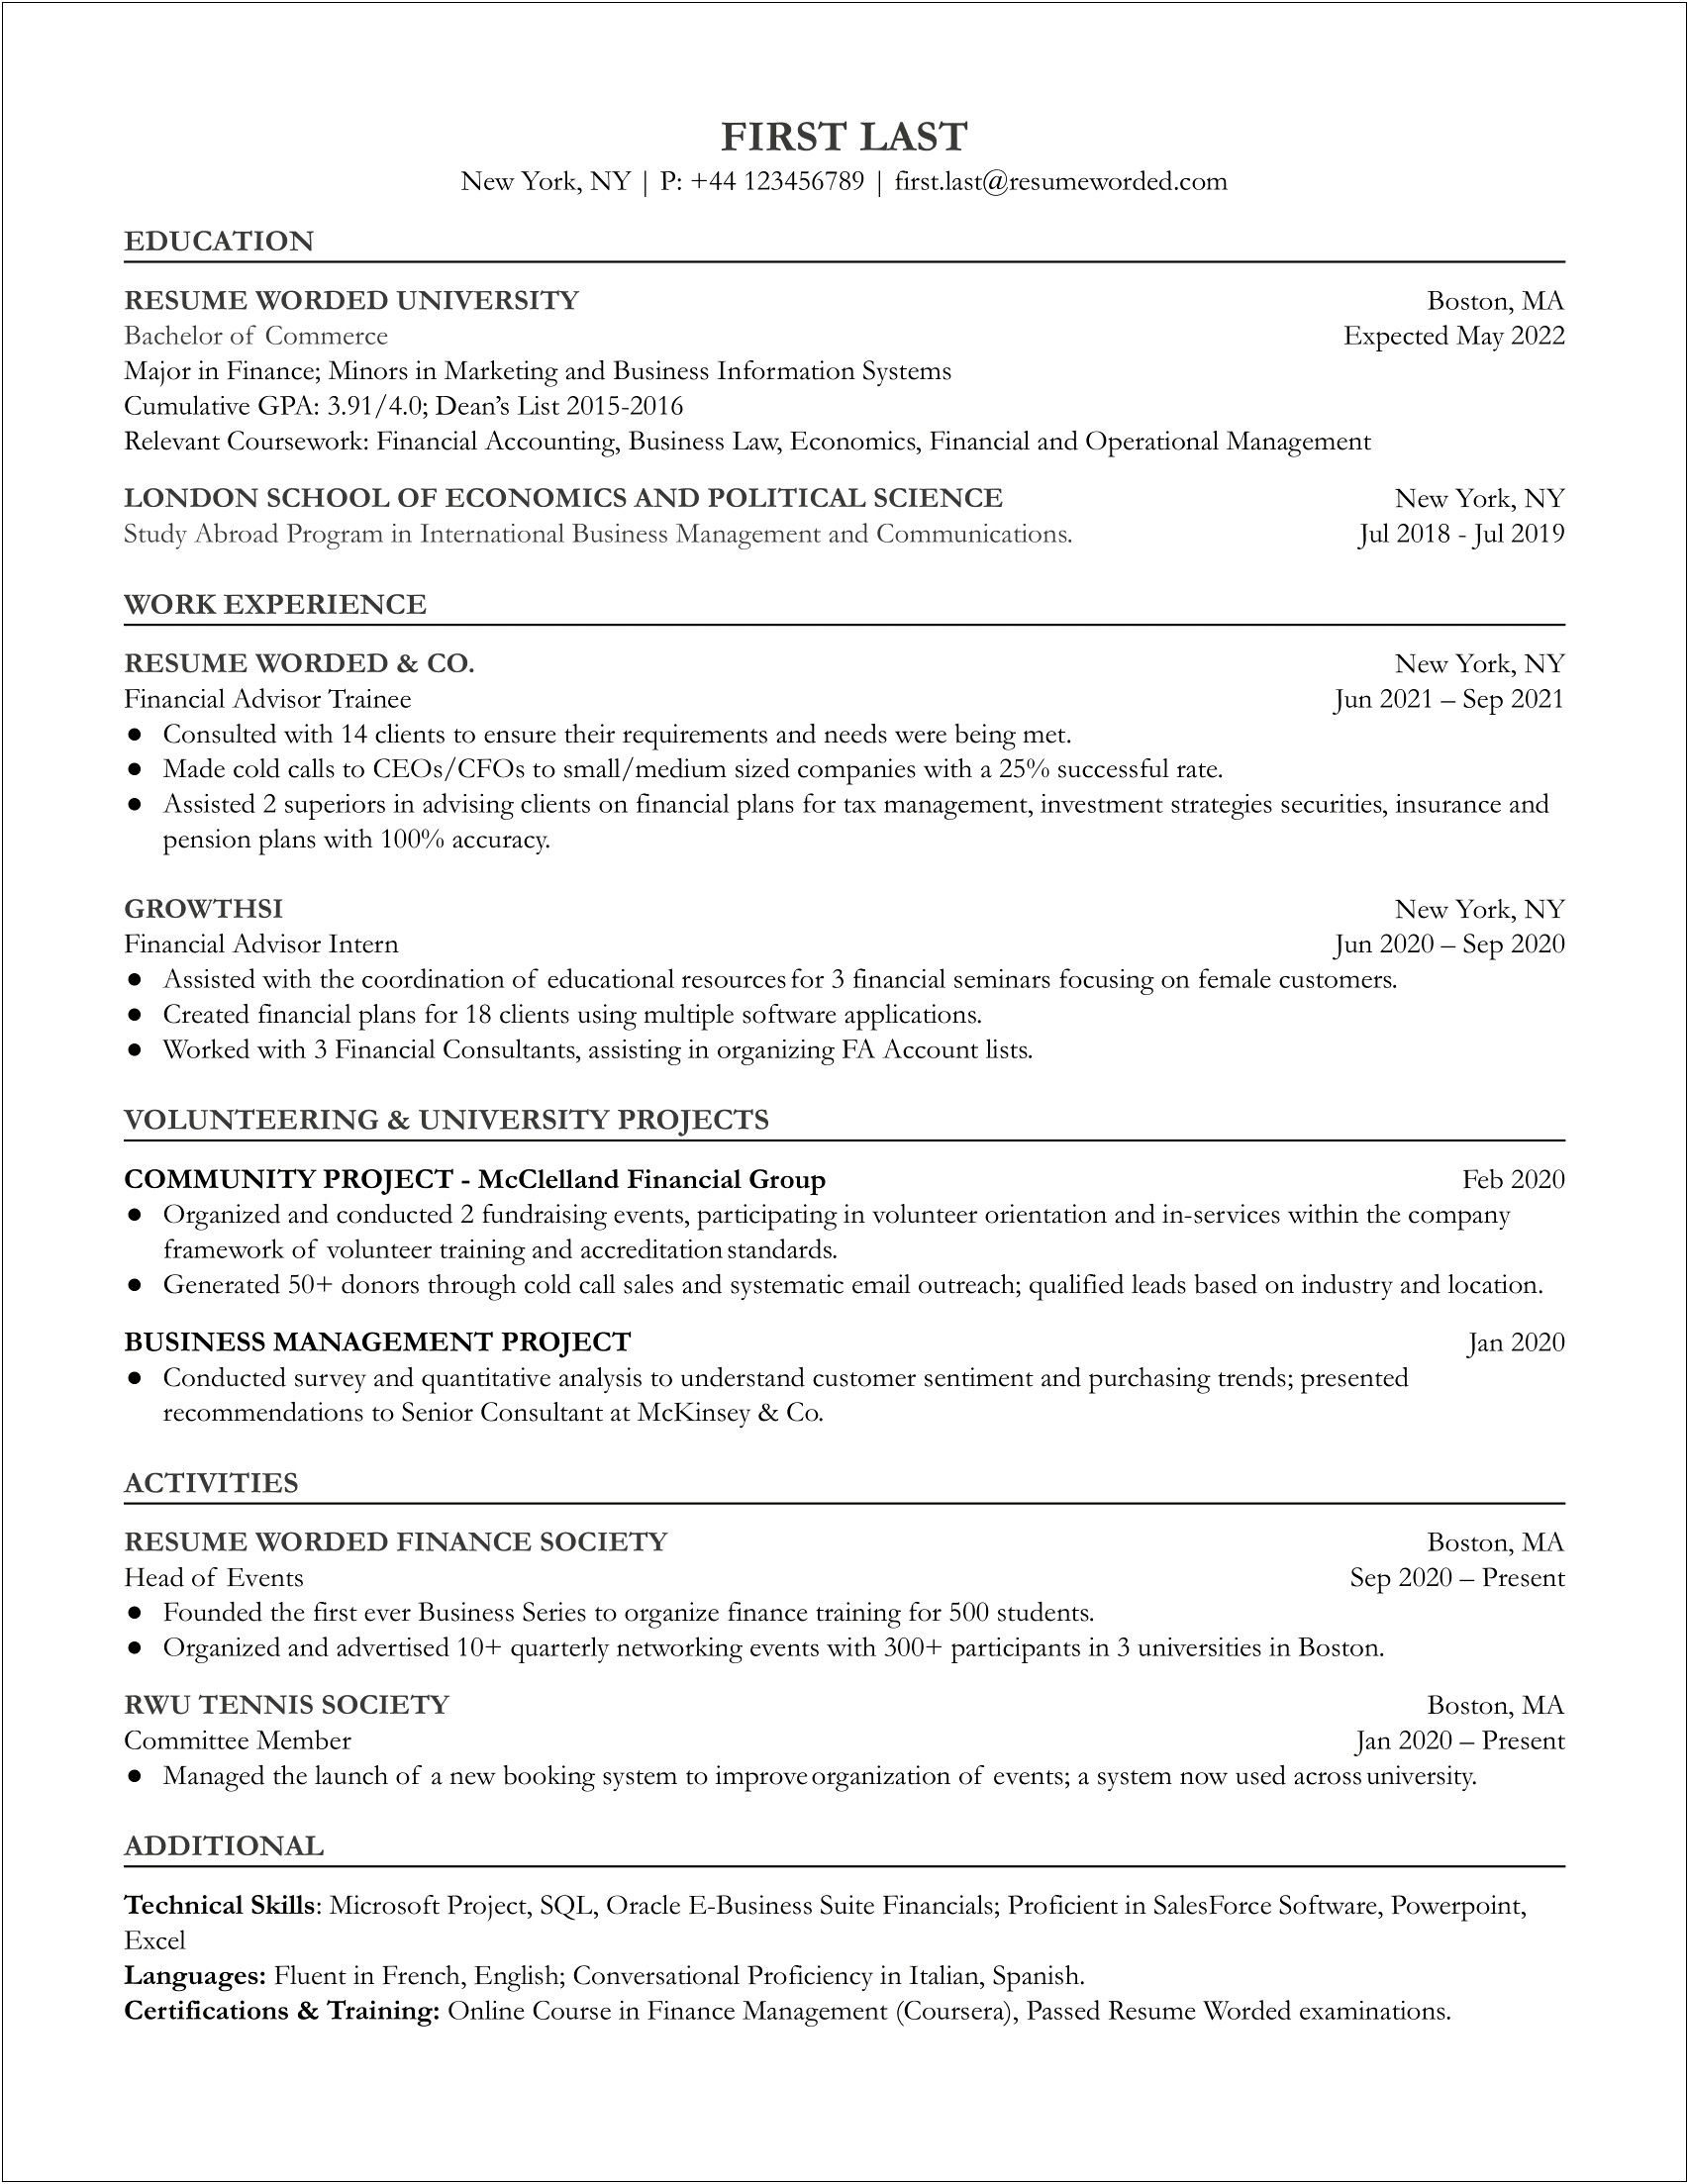 Sample Resume For Financial Aid Specialist